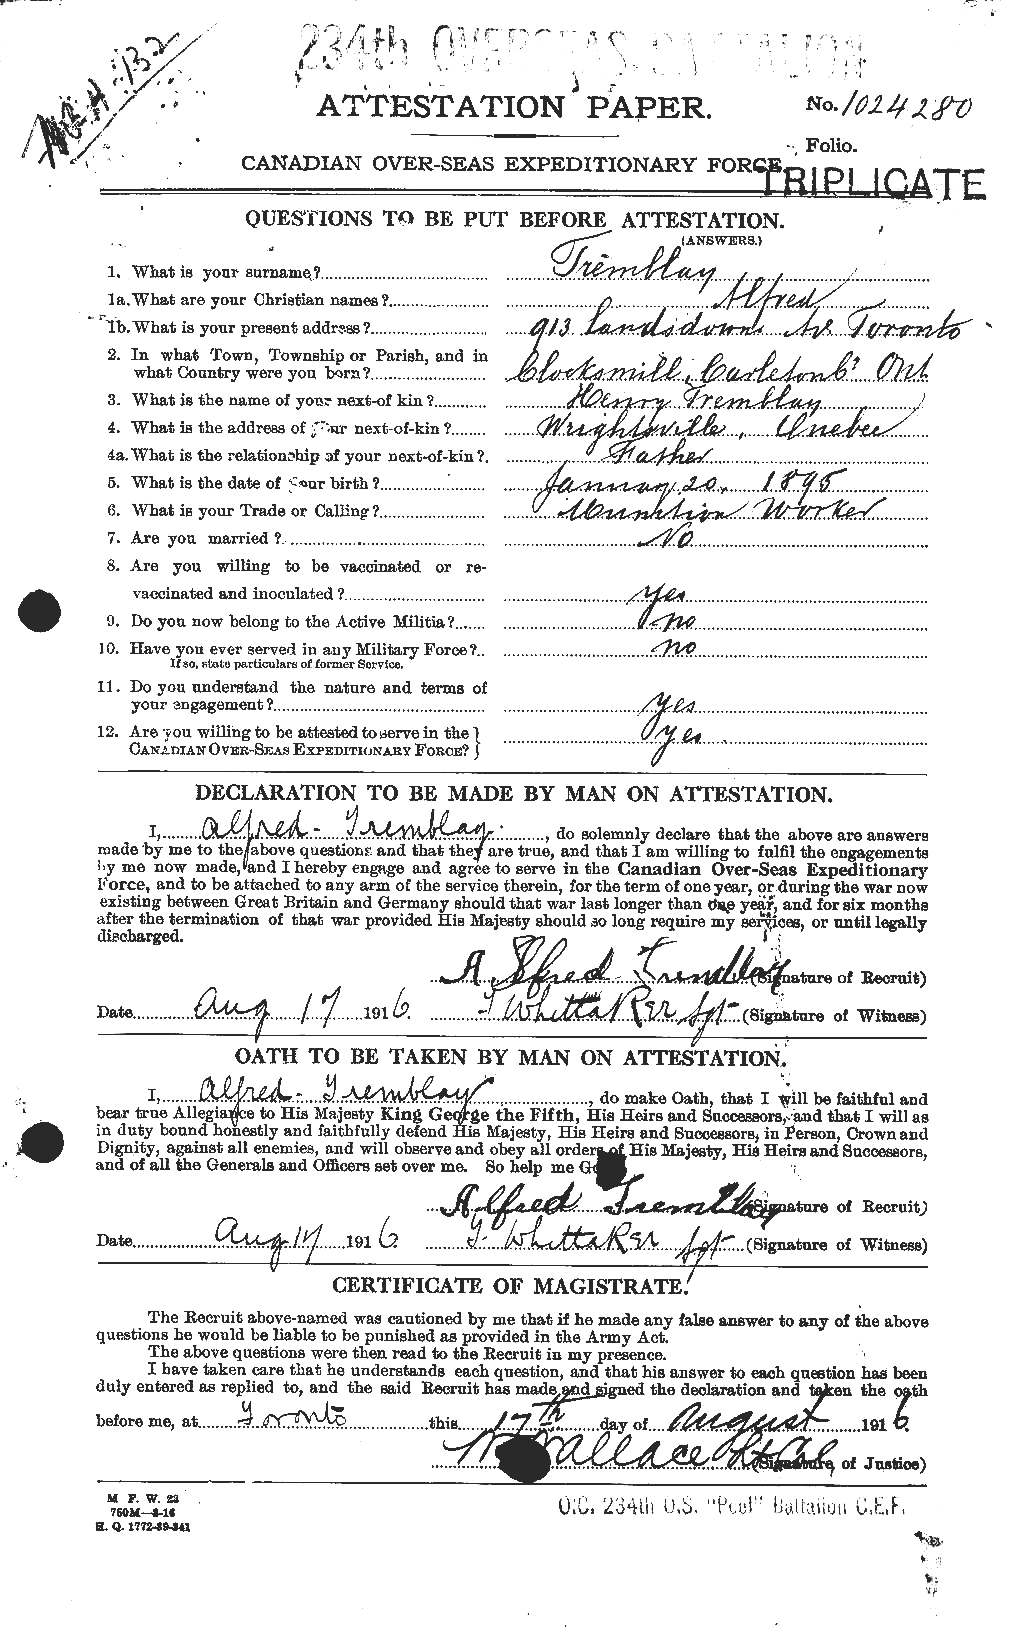 Personnel Records of the First World War - CEF 638913a